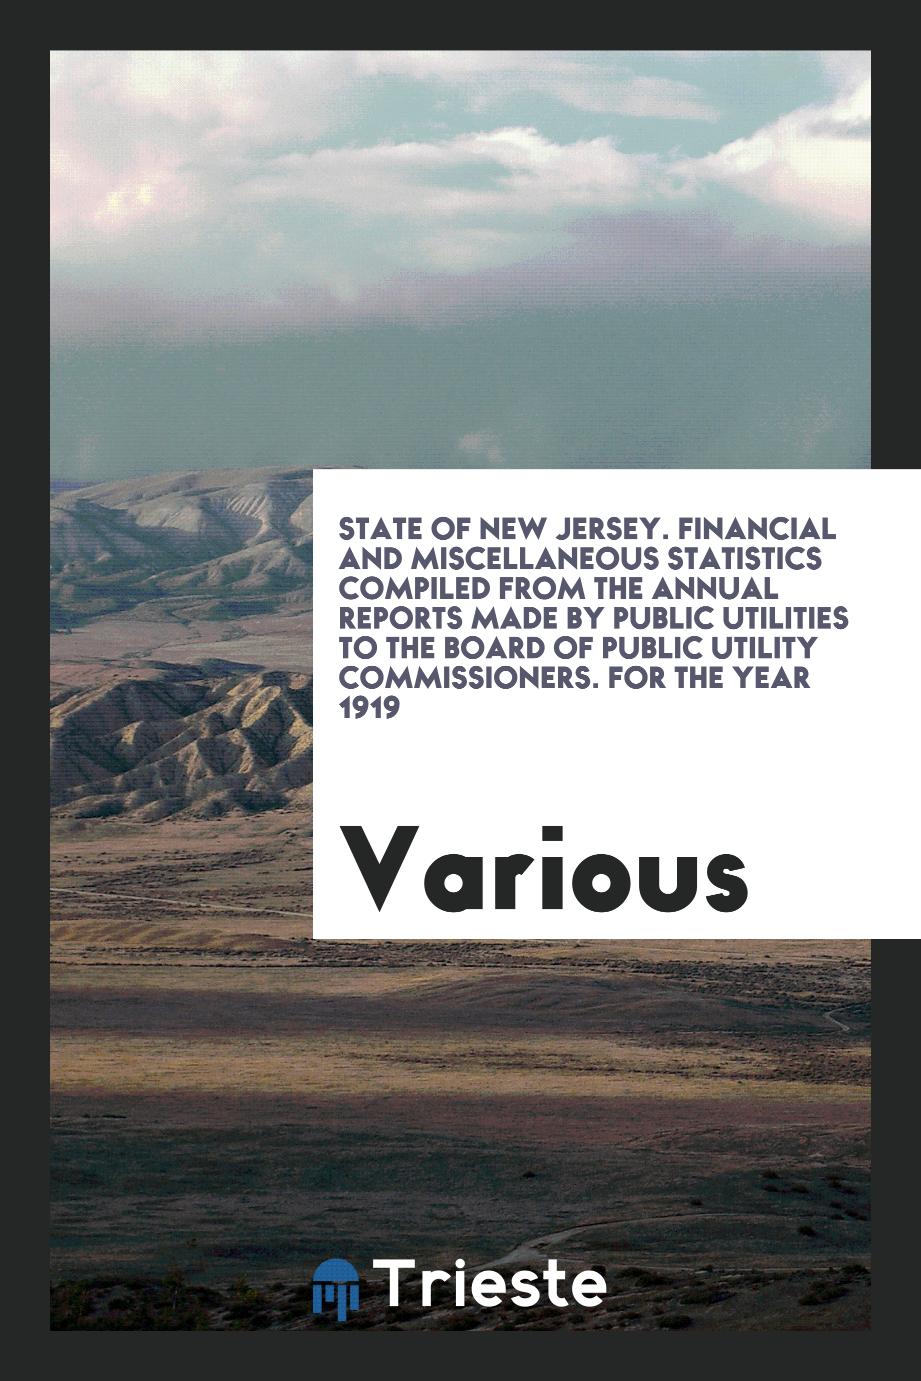 State of New Jersey. Financial and Miscellaneous Statistics Compiled from the Annual Reports Made by Public Utilities to the Board of Public Utility Commissioners. For the Year 1919